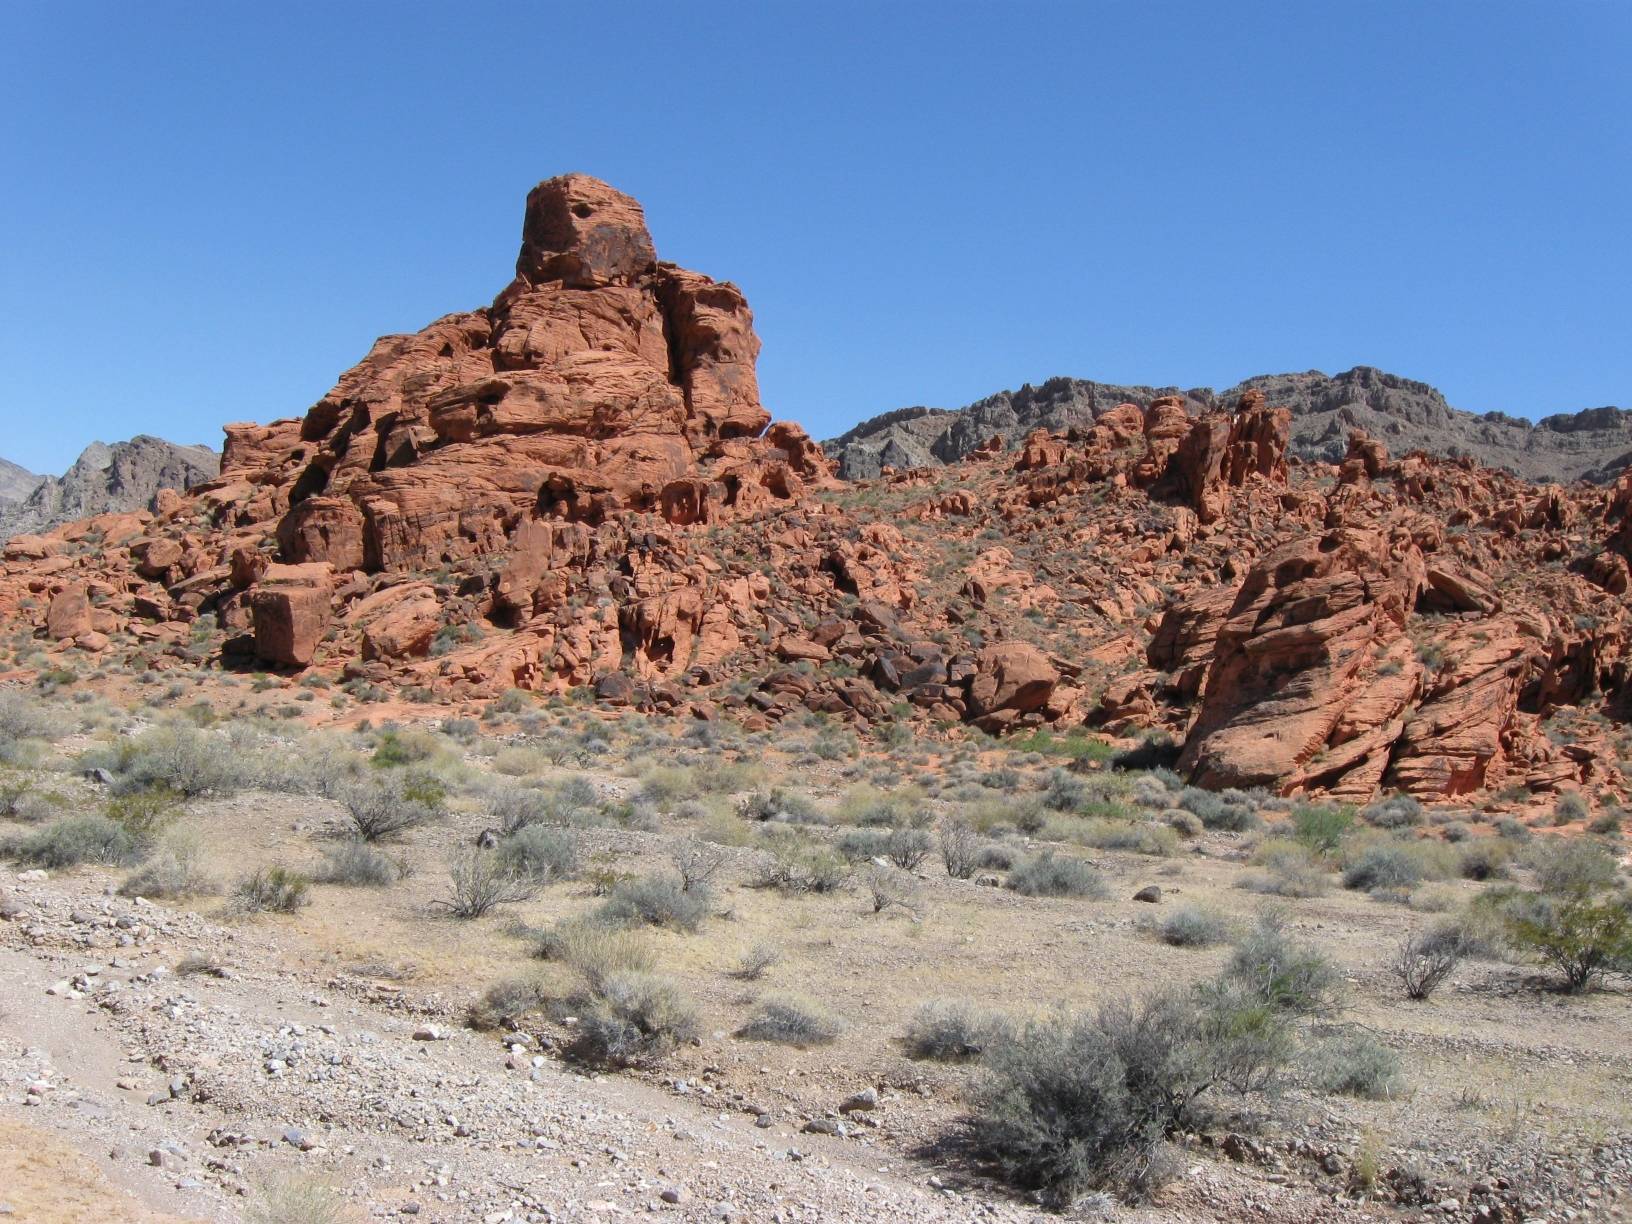 Image: Red sandstone rocks near the western entrance to the park